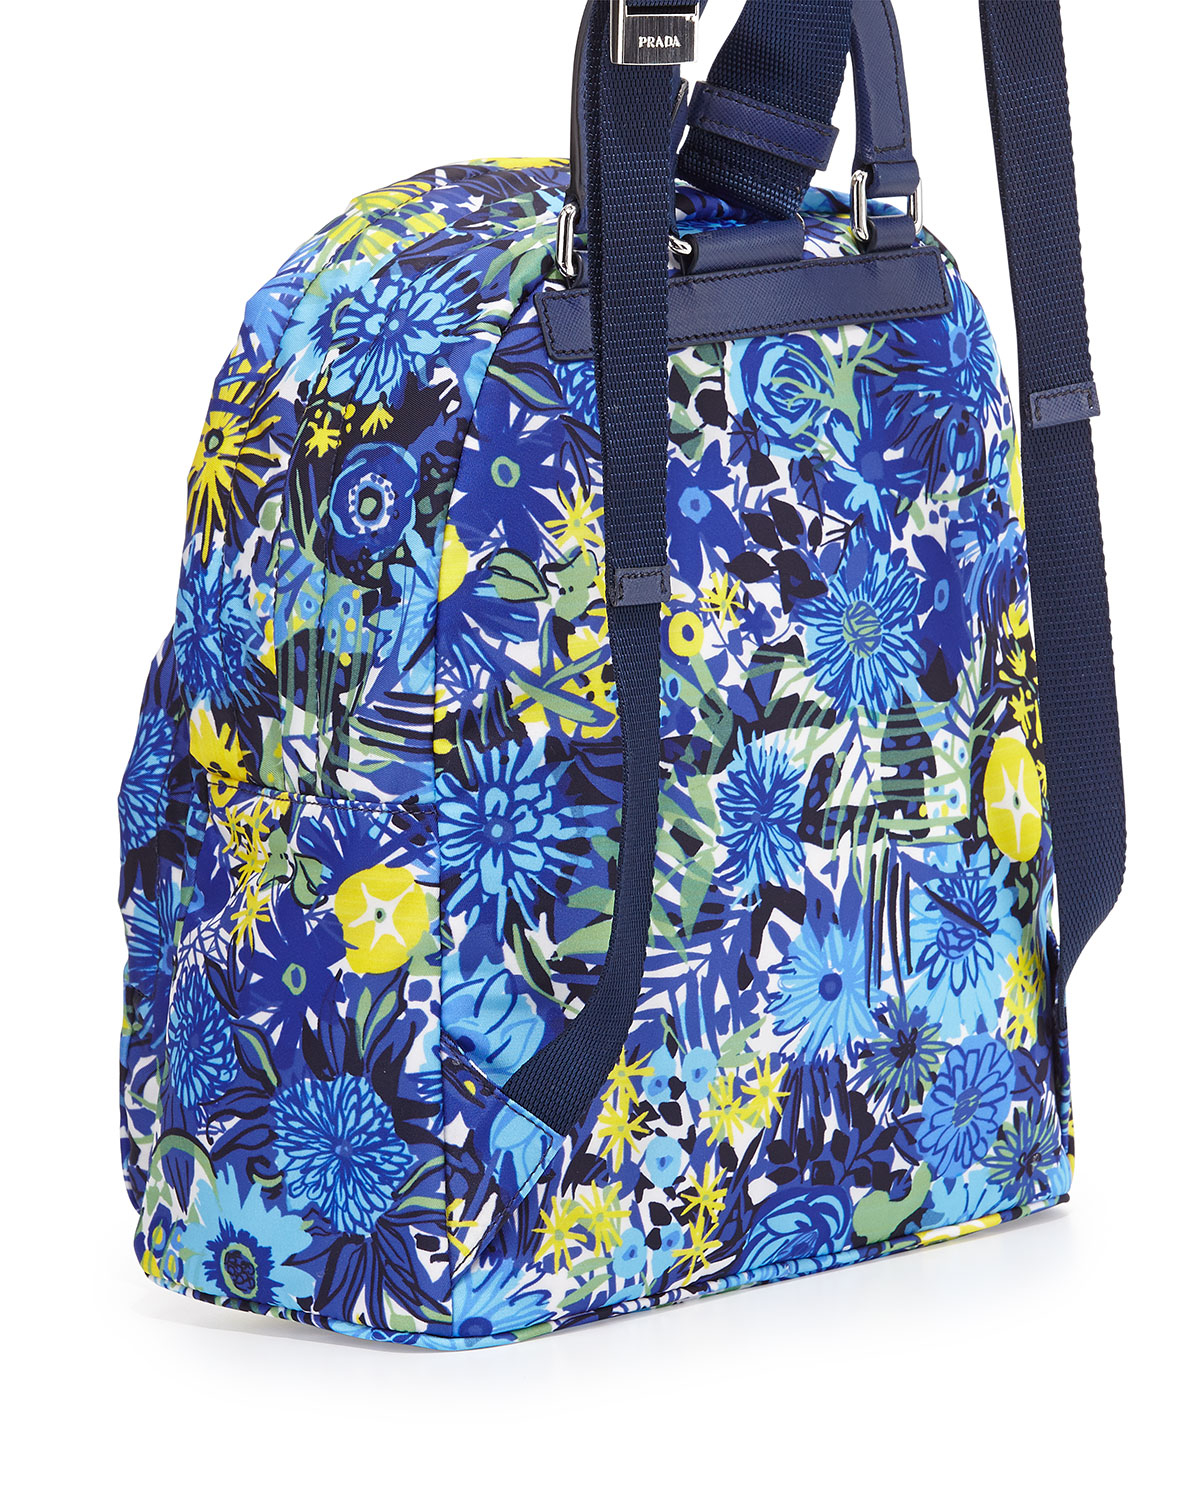 Prada Tessuto Stampato Floral Backpack in Blue (floral) | Lyst  